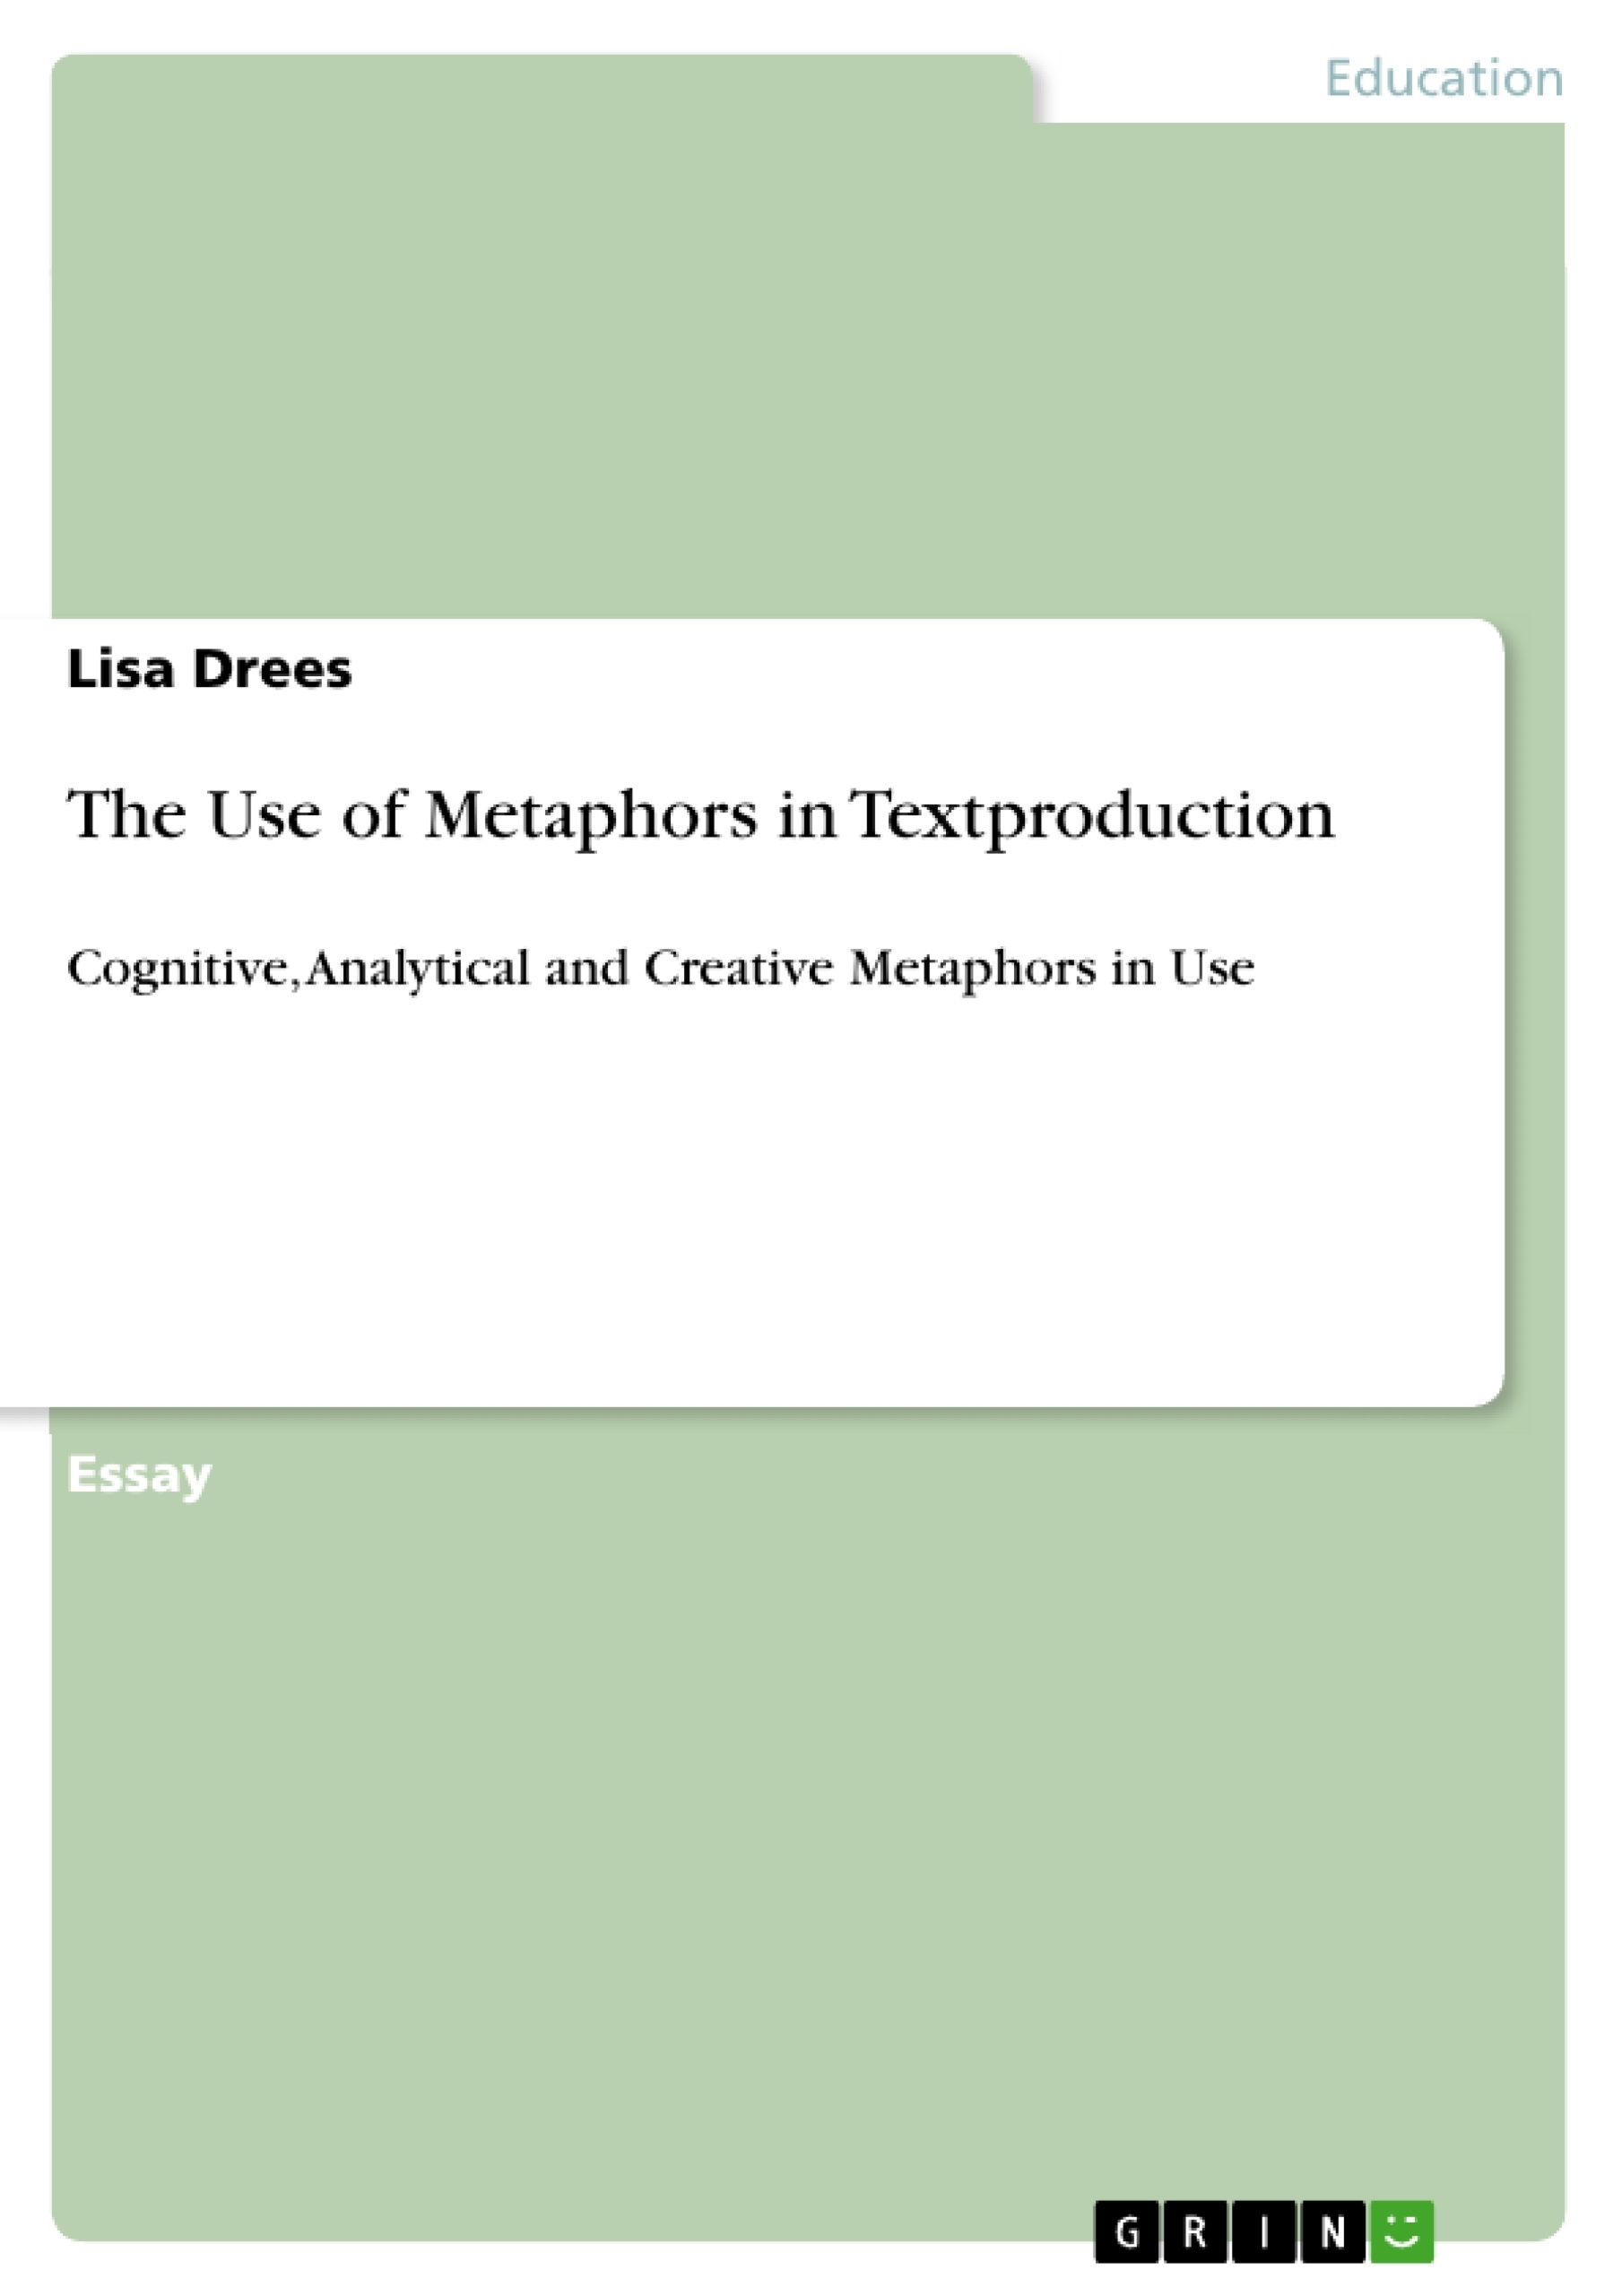 Title: The Use of Metaphors in Textproduction